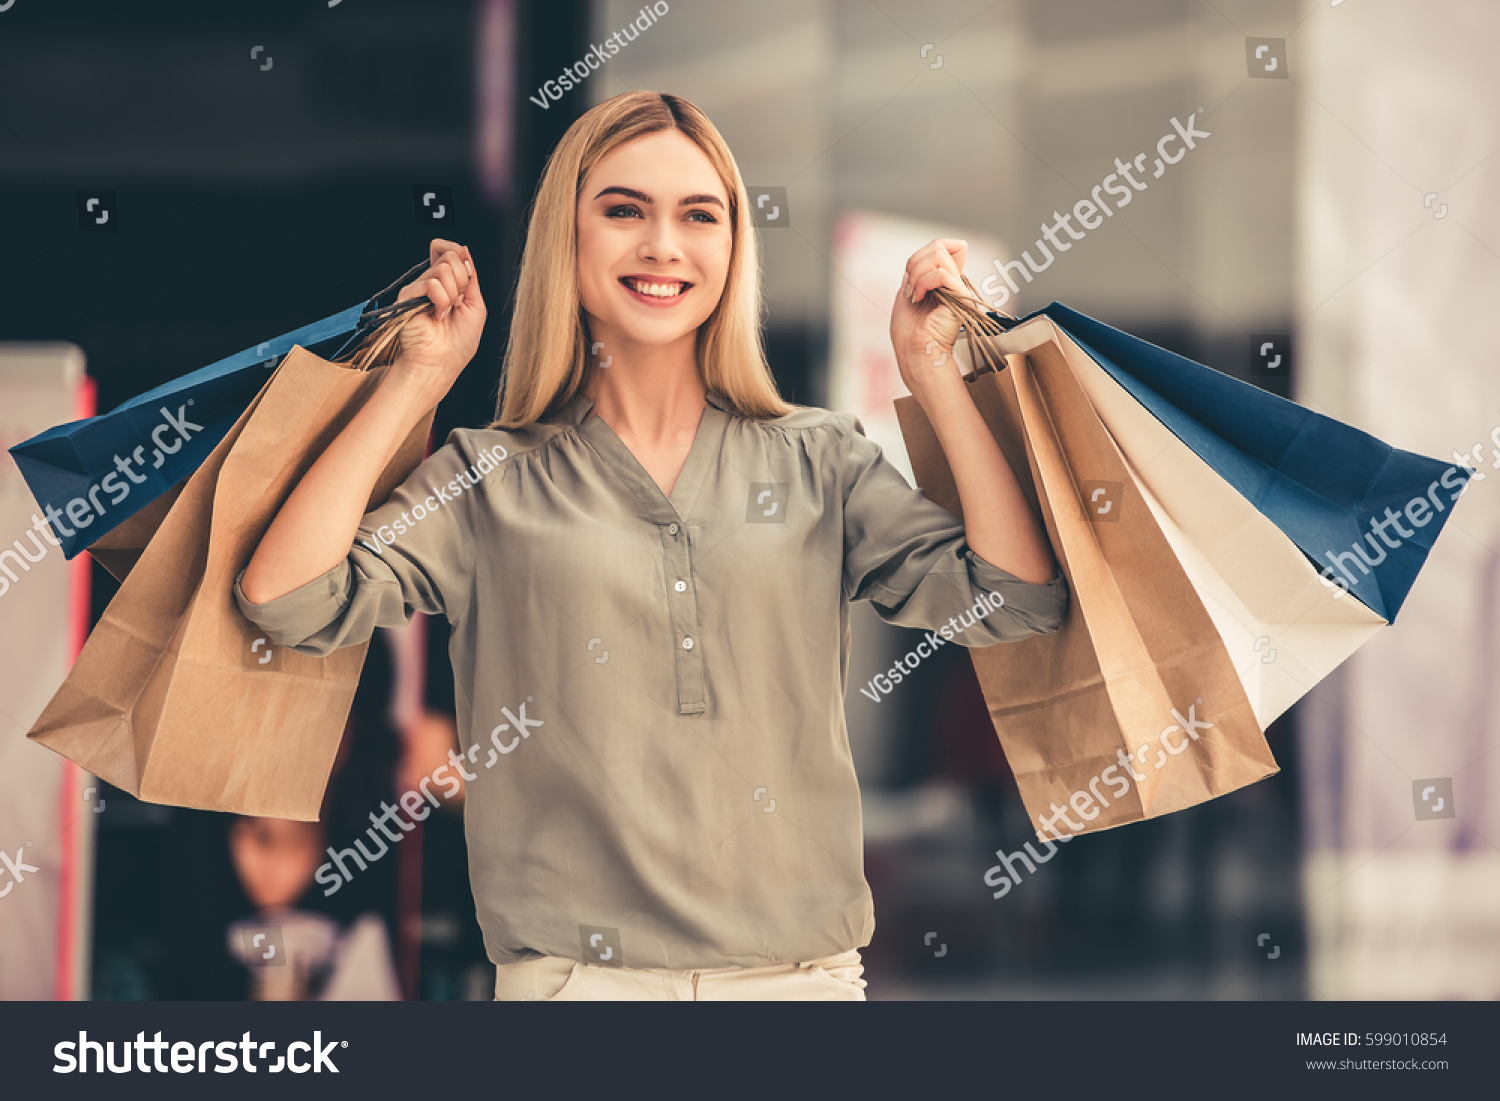 Attractive girl is holding shopping bags, looking at camera and smiling while standing in the mall #599010854